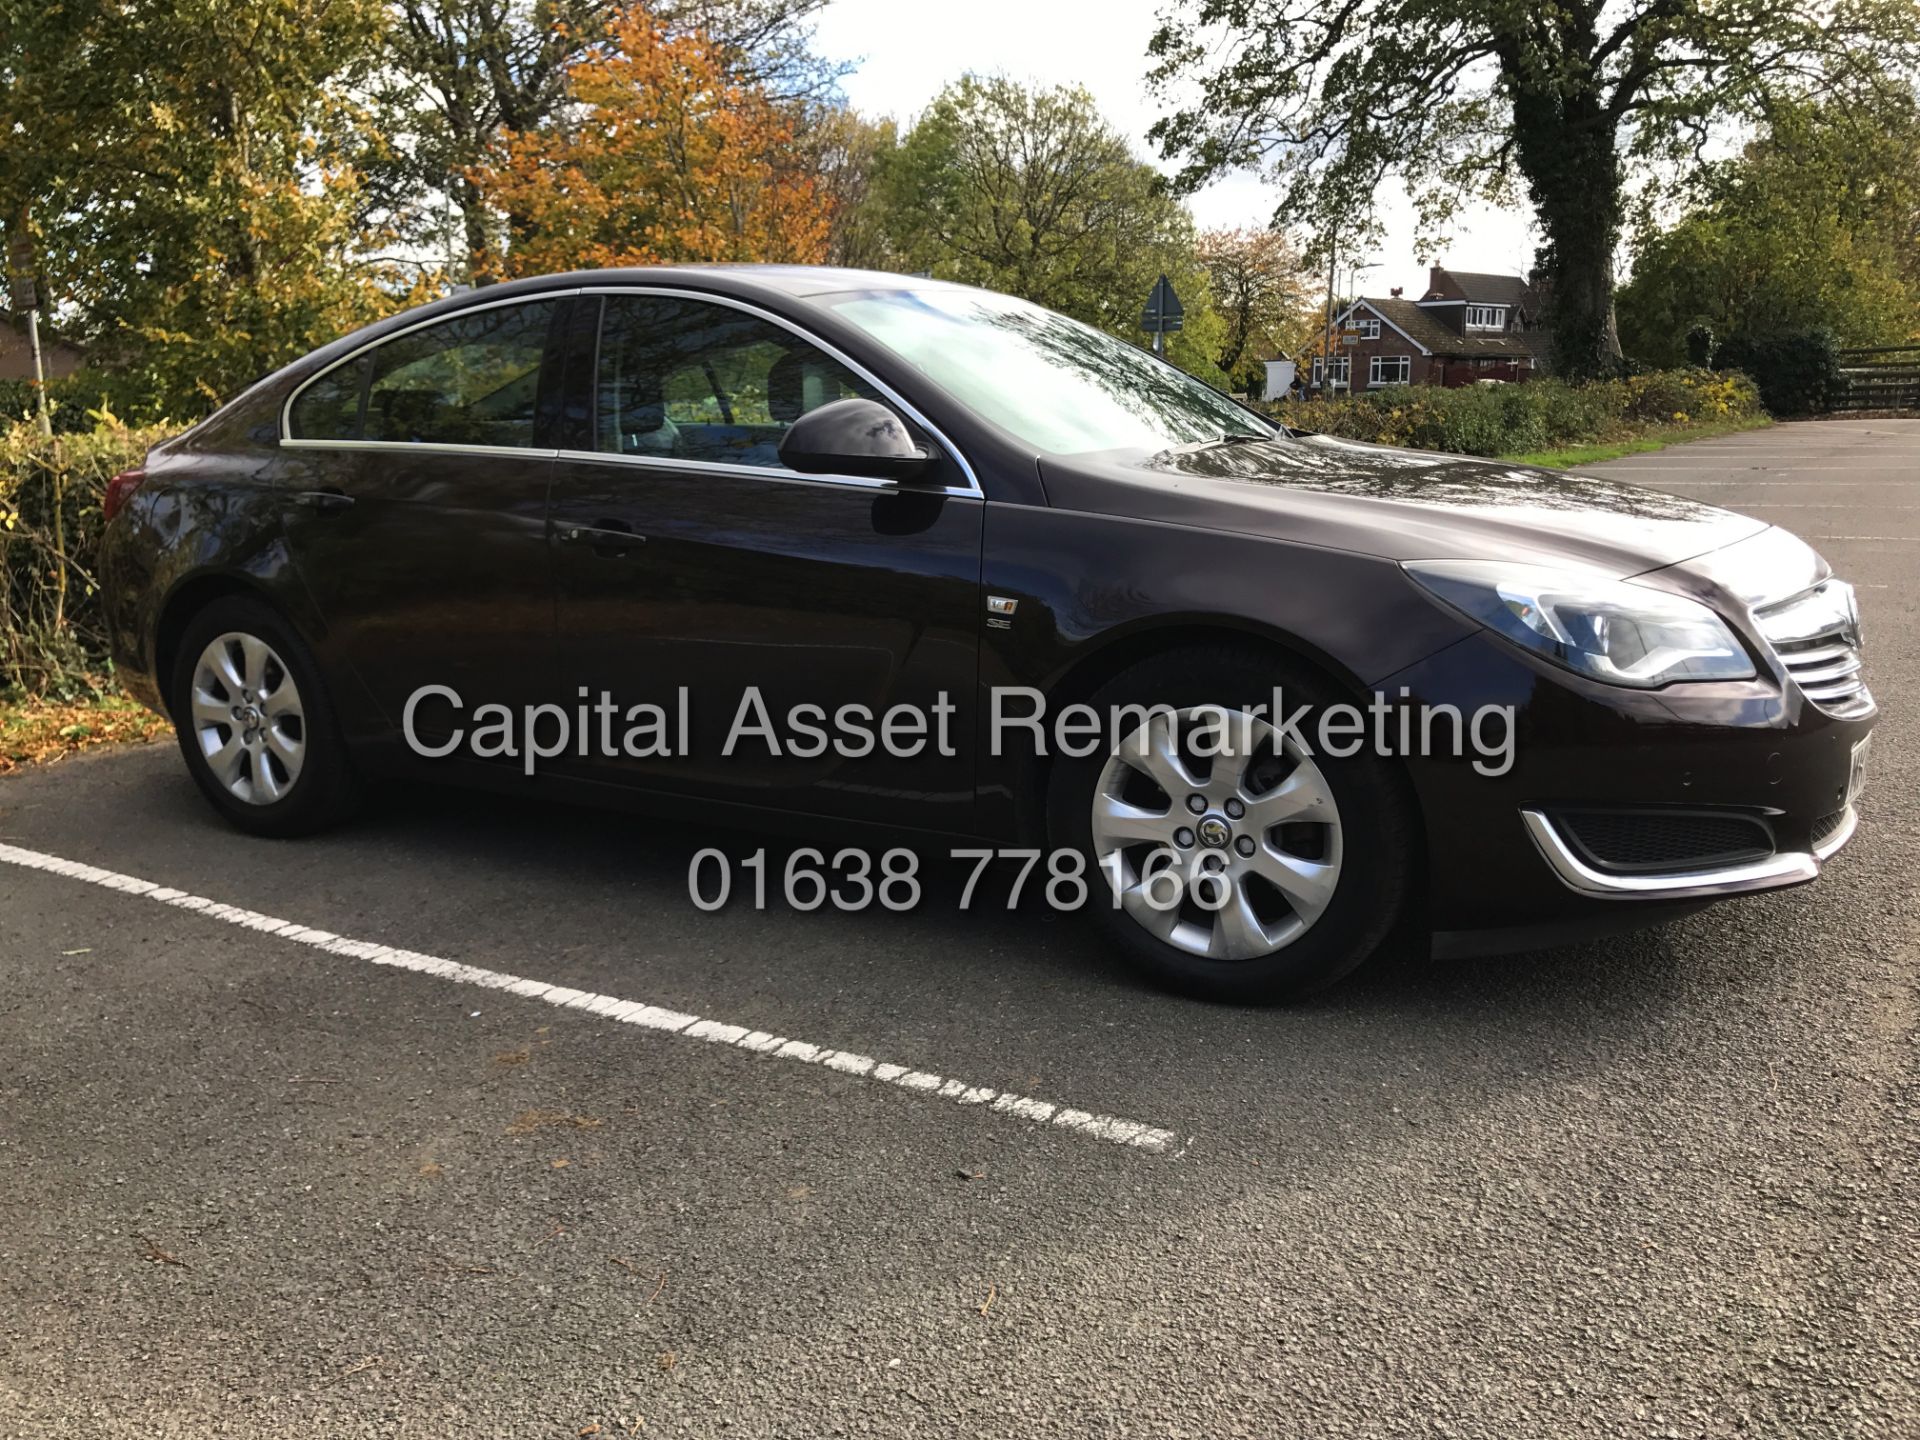 On Sale VAUXHALL INSIGNIA 2.0CDTI "SE" (14 REG - NEW SHAPE)1 OWNER WITH HISTORY - CLIMATE - AIR CON